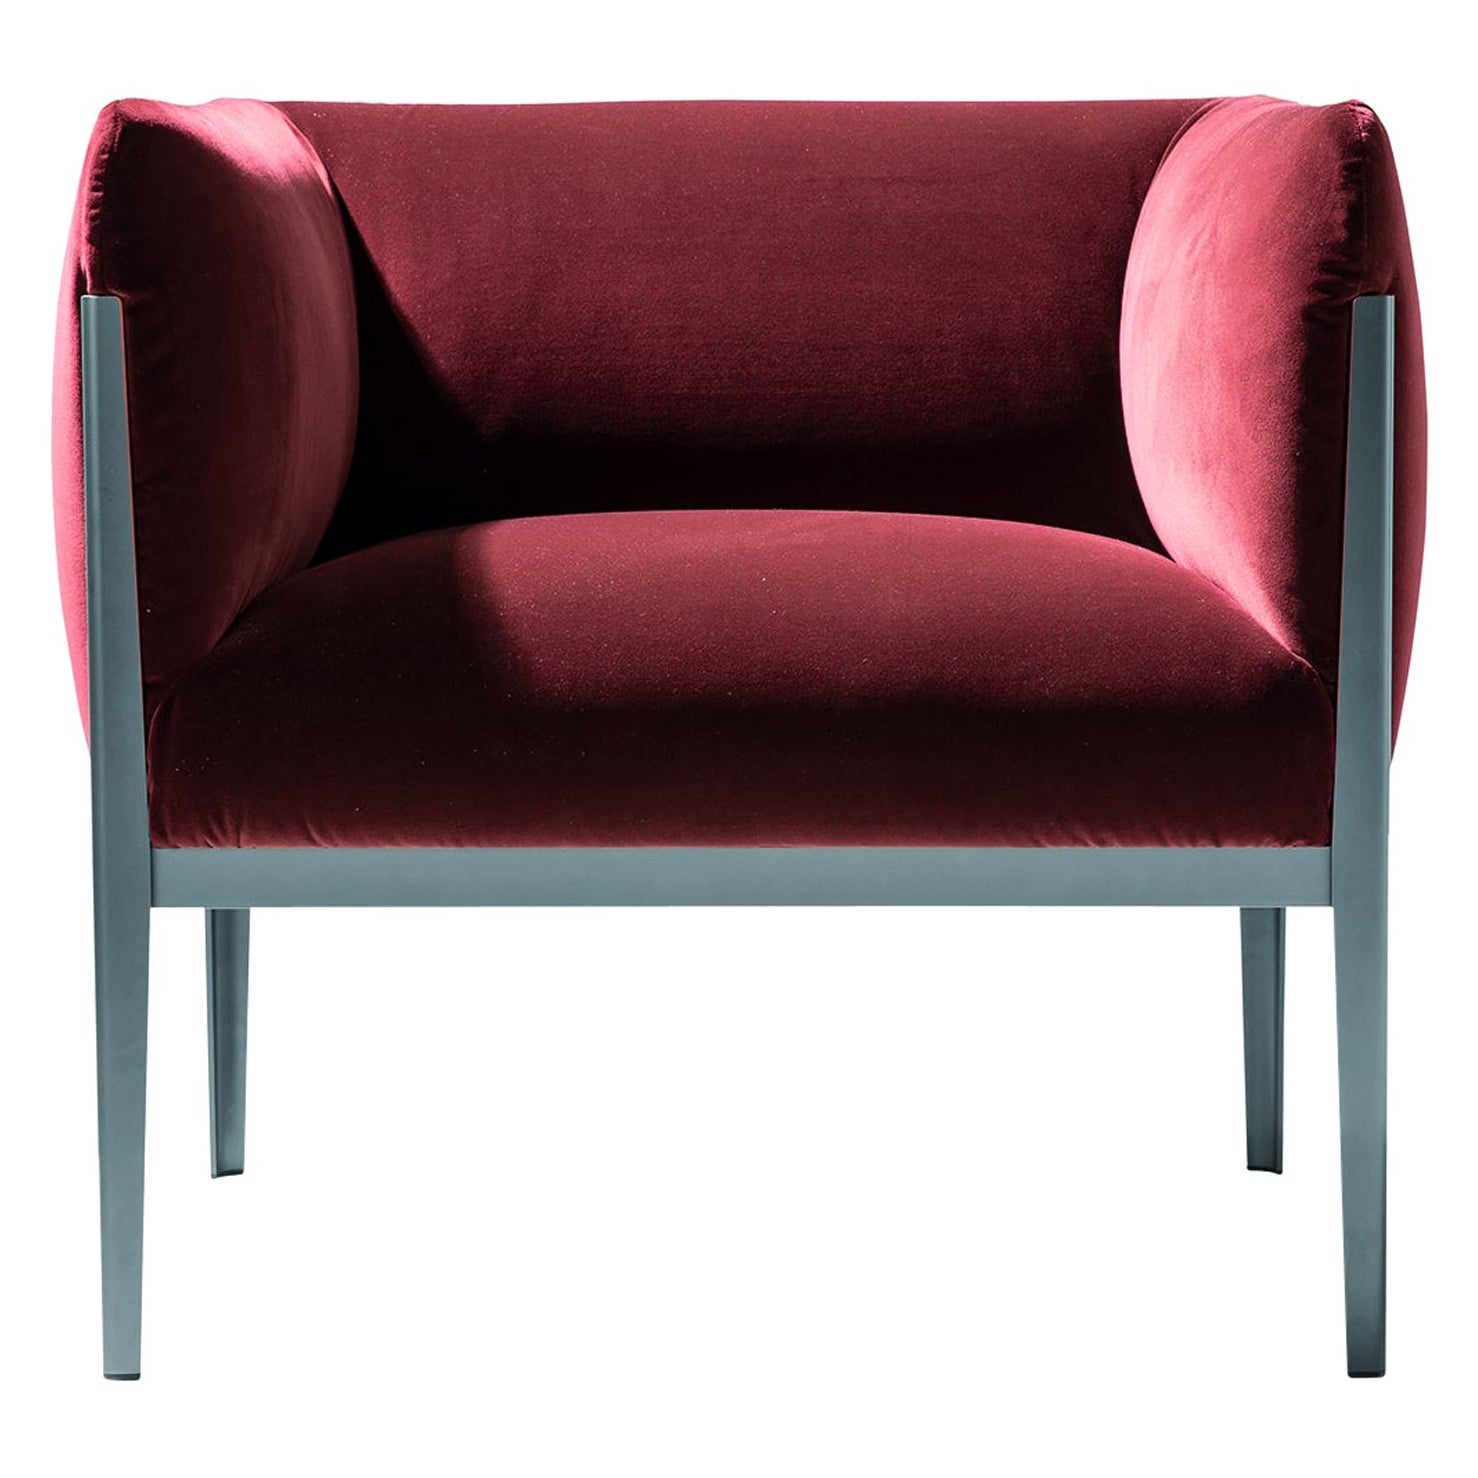 Ronan & Erwan Bourroullec 'Cotone' Armchair, Aluminum and Fabric by Cassina For Sale